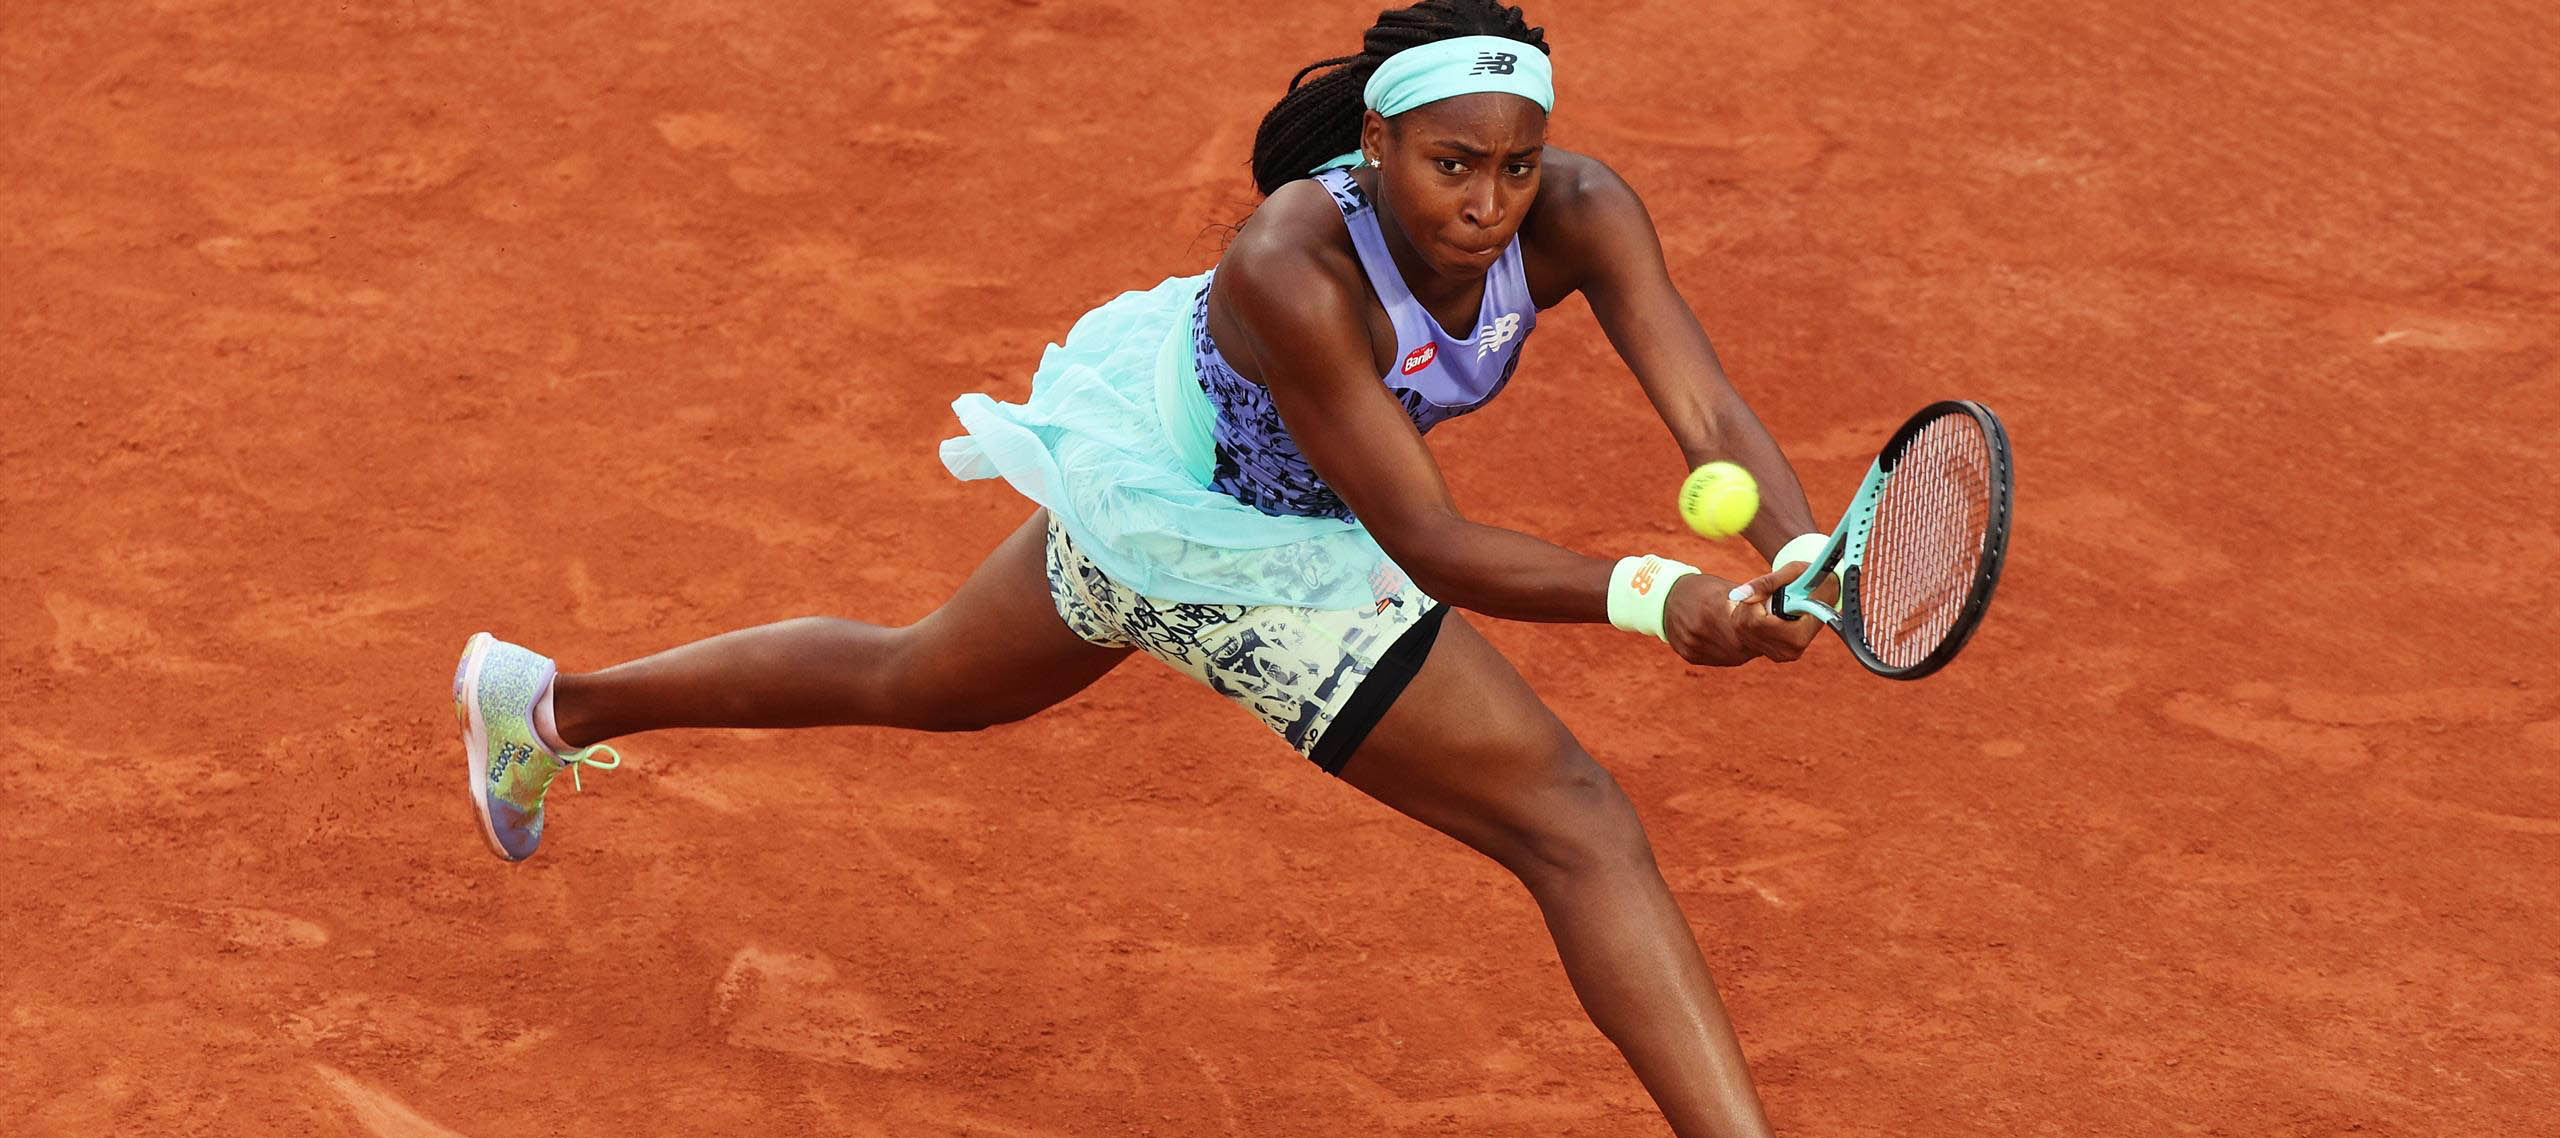 2022 French Open Betting Update Trevisan and Gauff Move to Semifinals